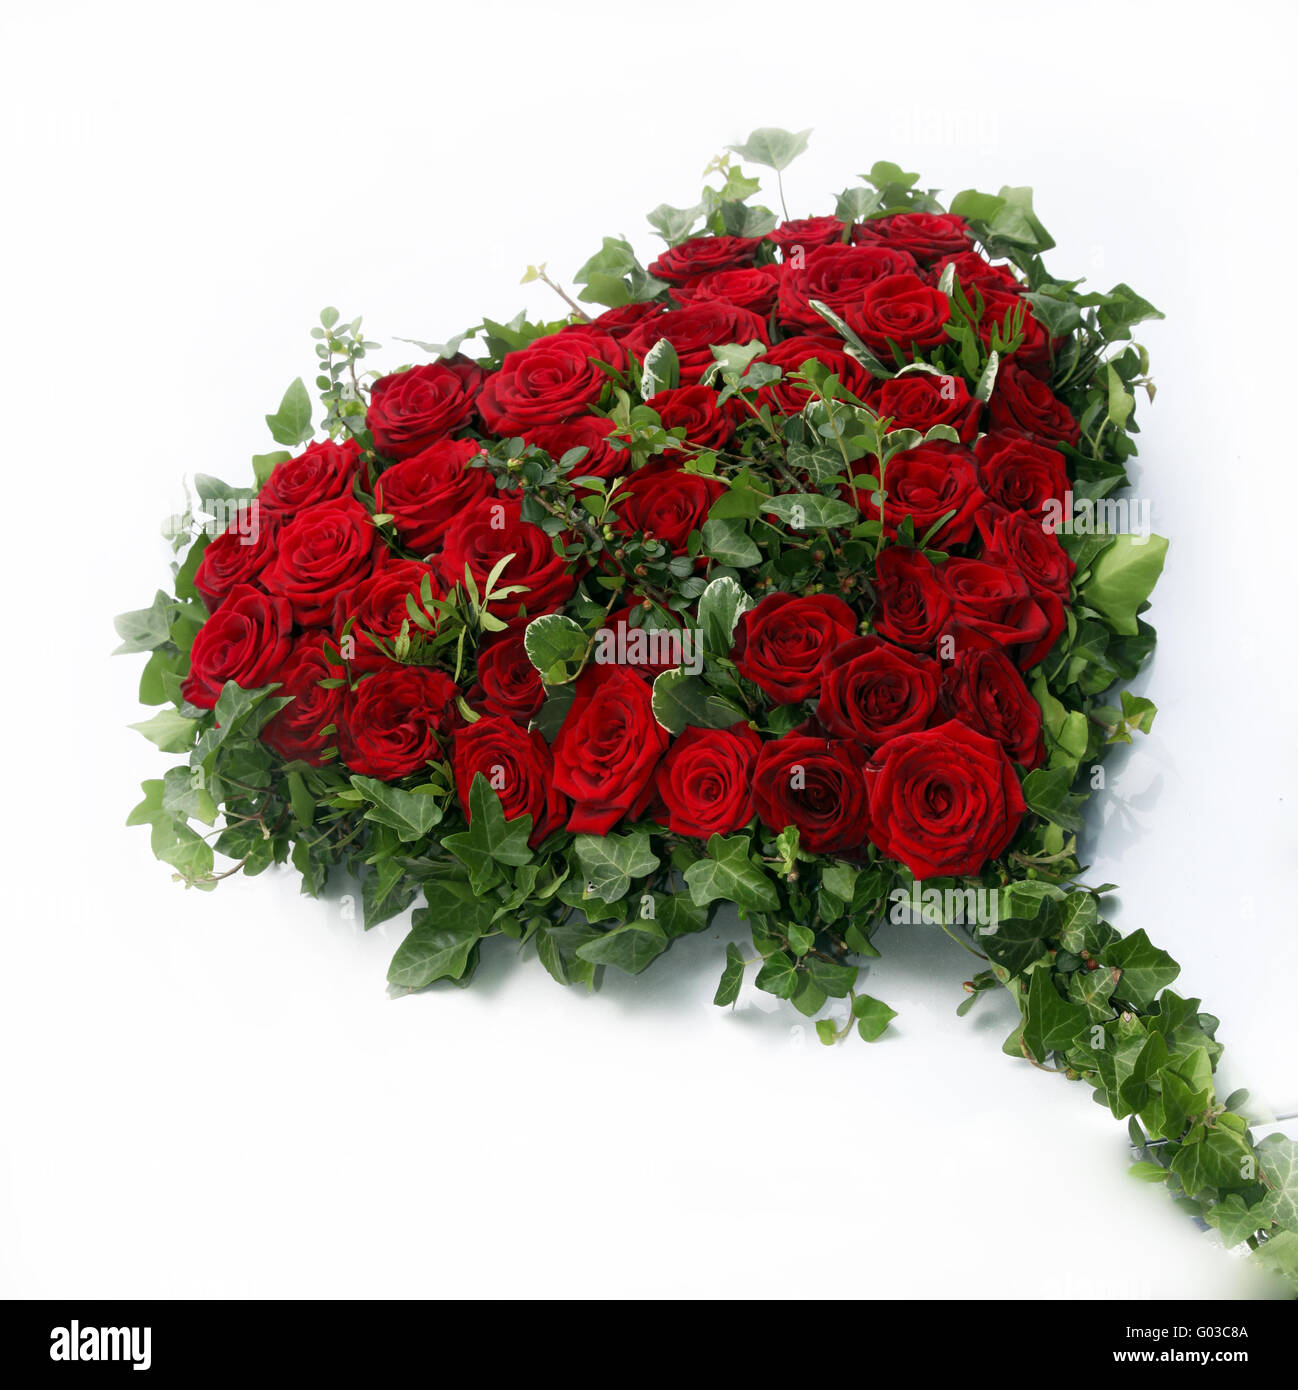 beautiful heart of red roses surrounded by ivy lea Stock Photo